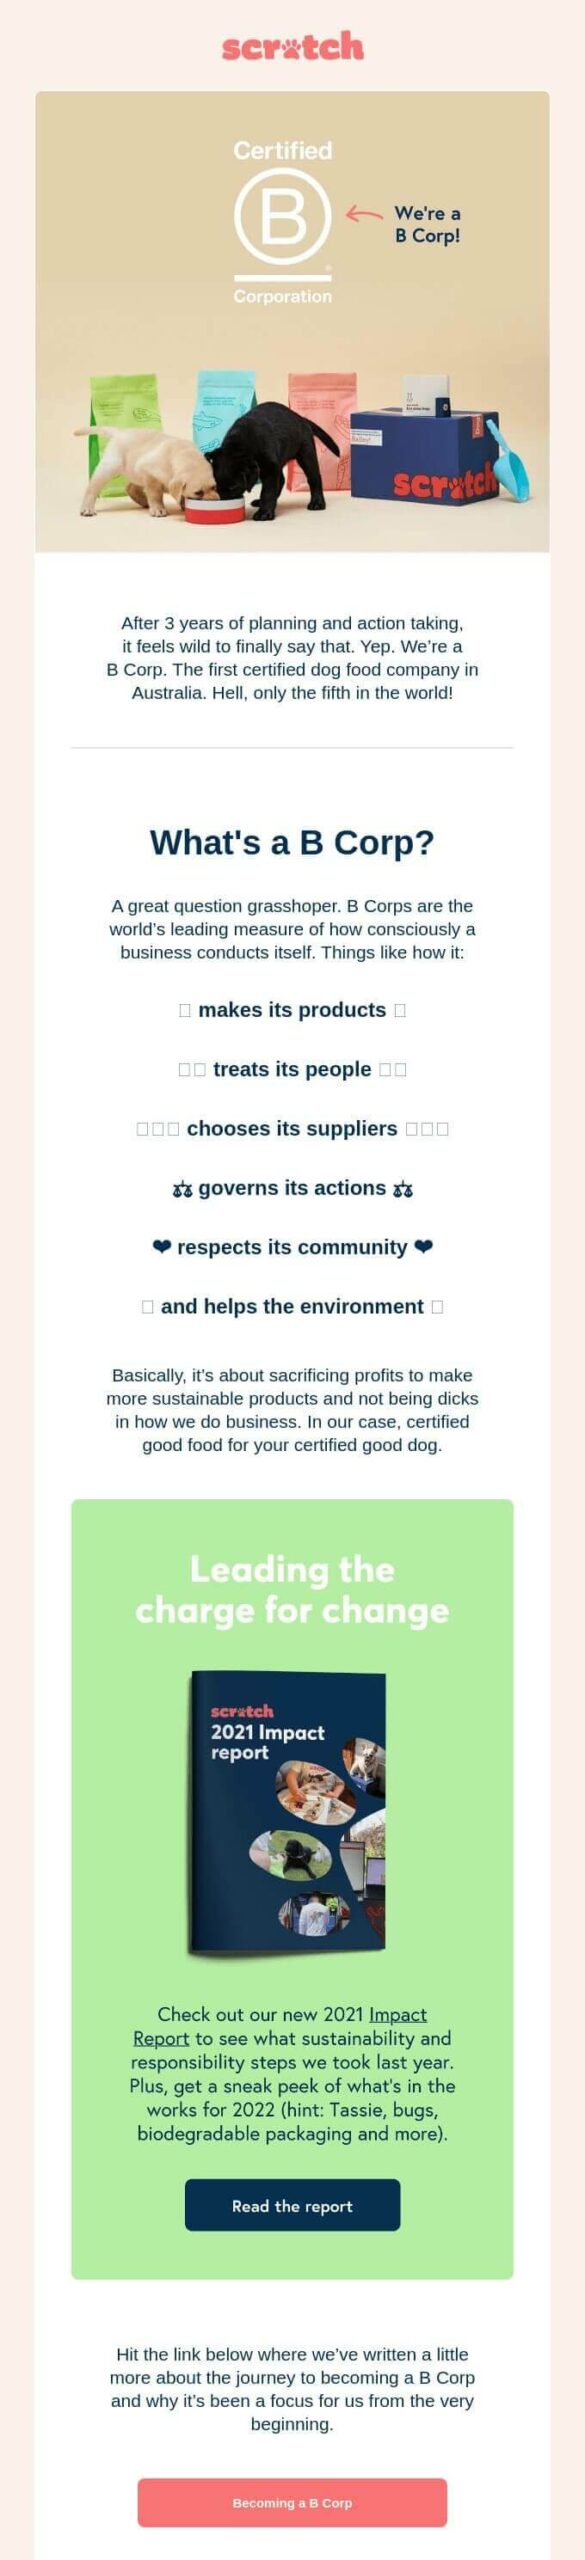 Scratch’s “We’re a B Corp” announcement email